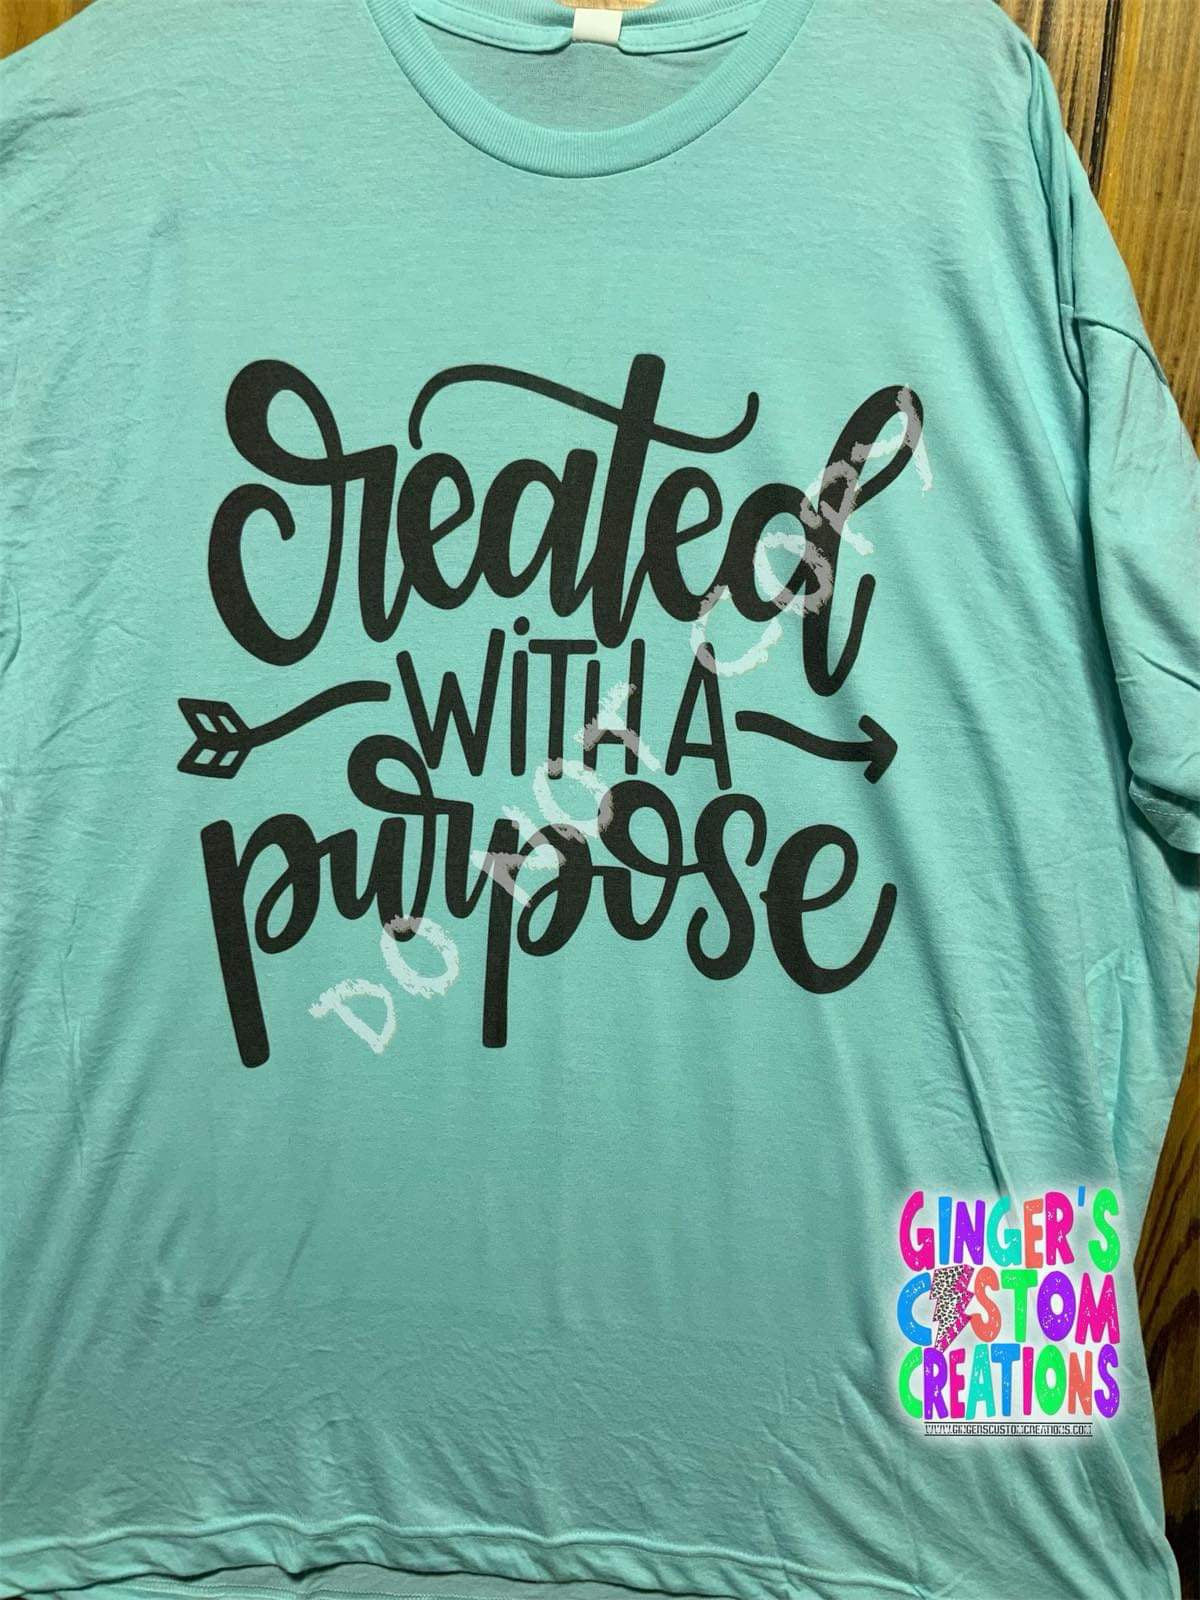 CREATED WITH A PURPOSE SHIRT